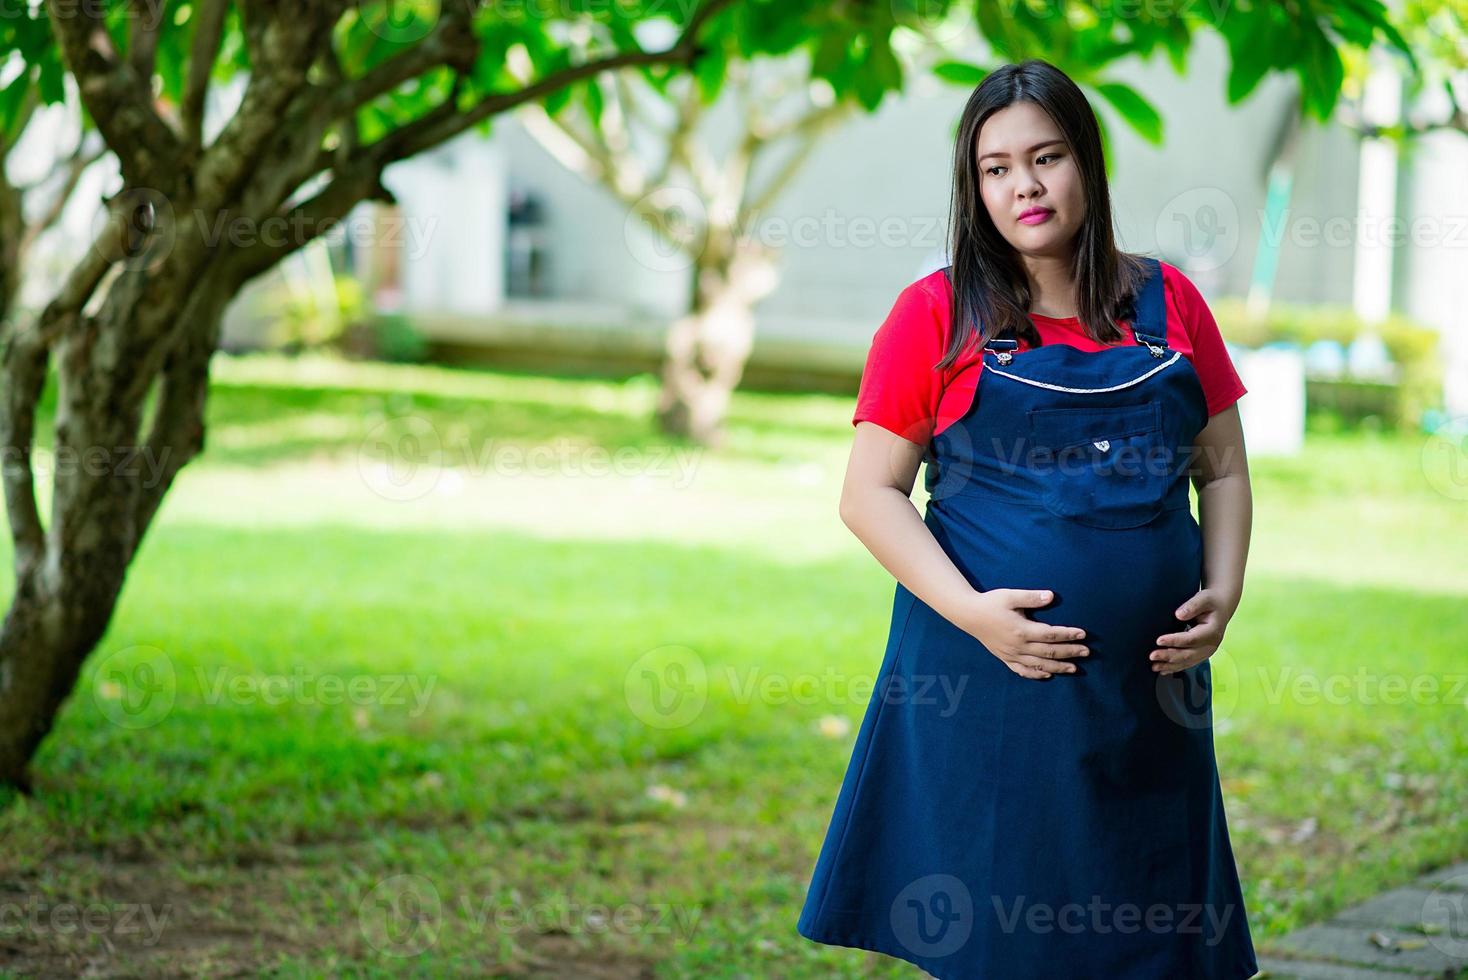 Pregnancy, maternity and new family photo